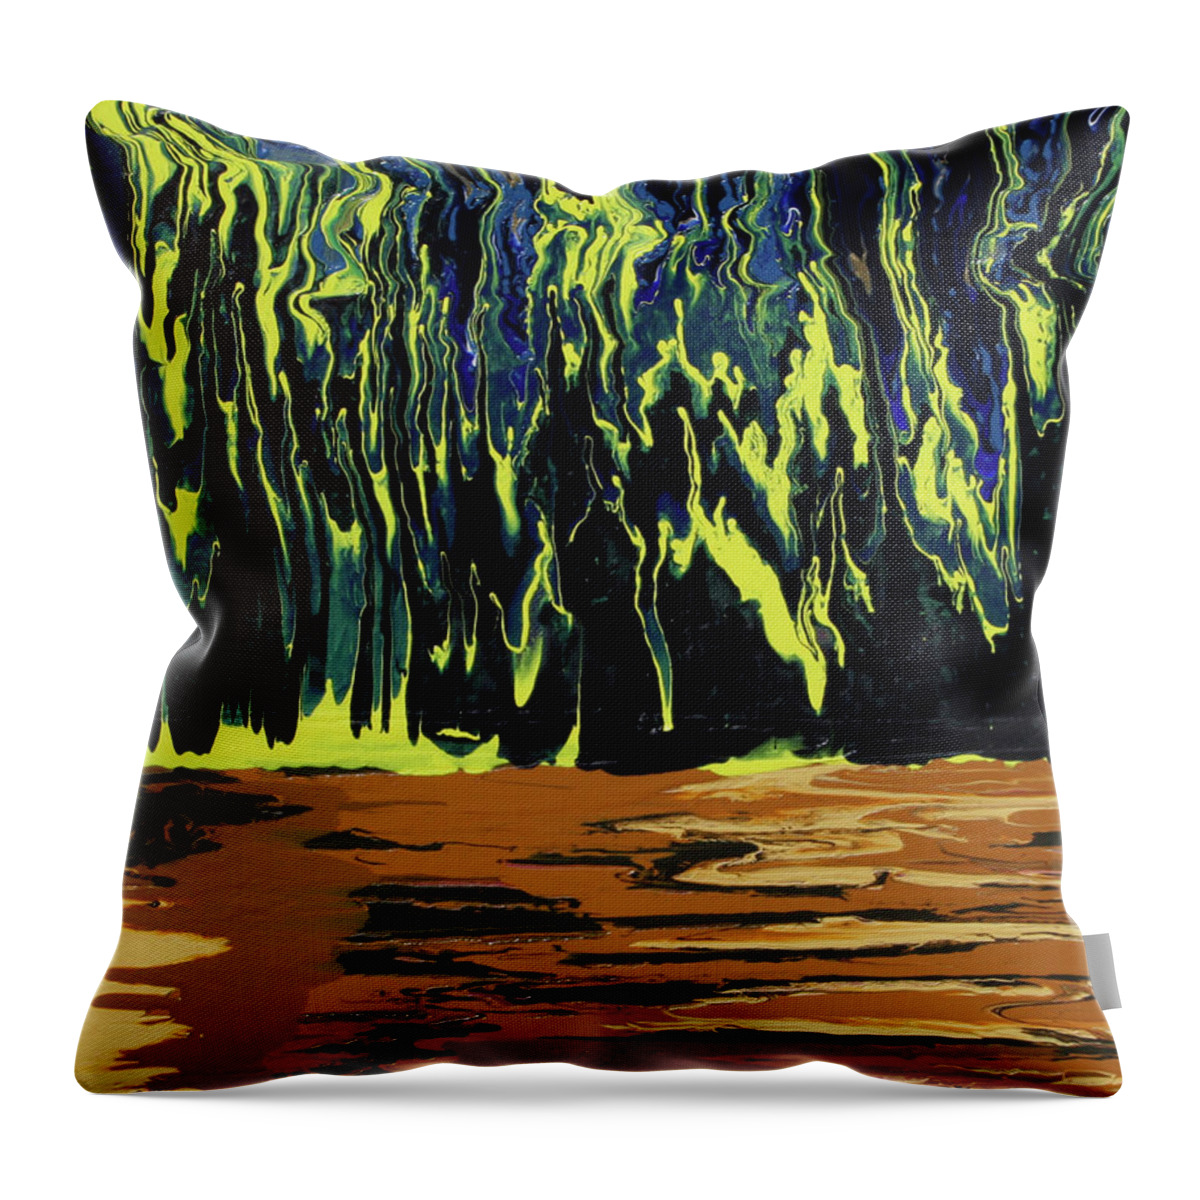 Fusionart Throw Pillow featuring the painting Thriller by Ralph White